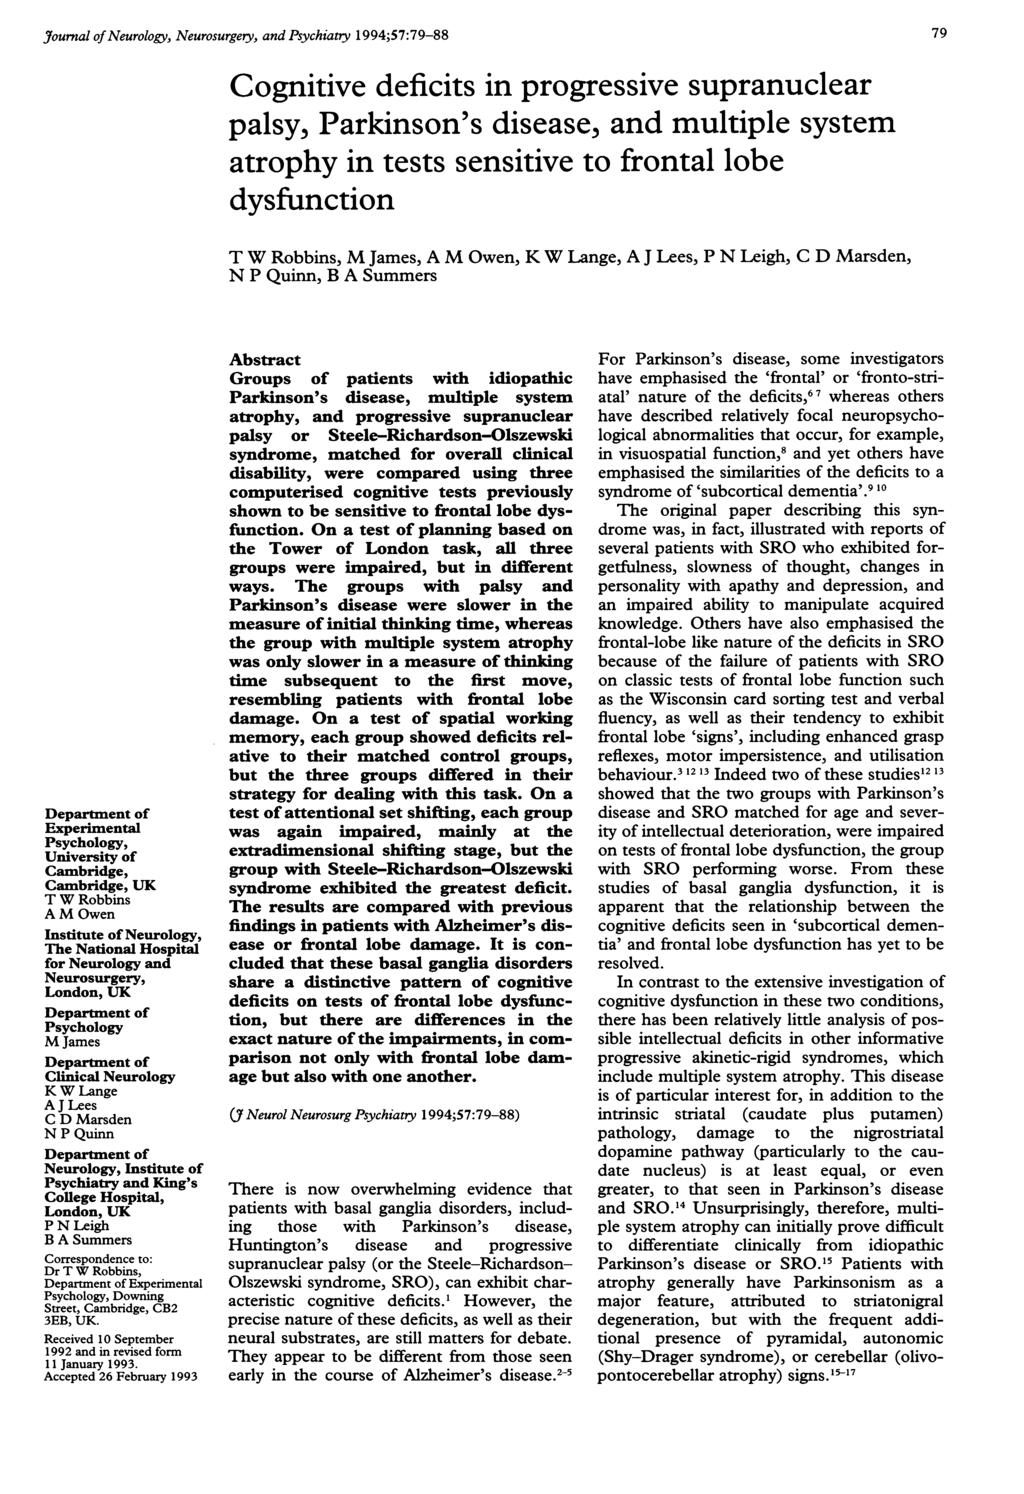 J7ournal of Neurology, Neurosurgery, and Psychiatry 1994;57:79-88 ognitive deficits in progressive supranuclear palsy, Parkinson's disease, and multiple system atrophy in tests sensitive to frontal